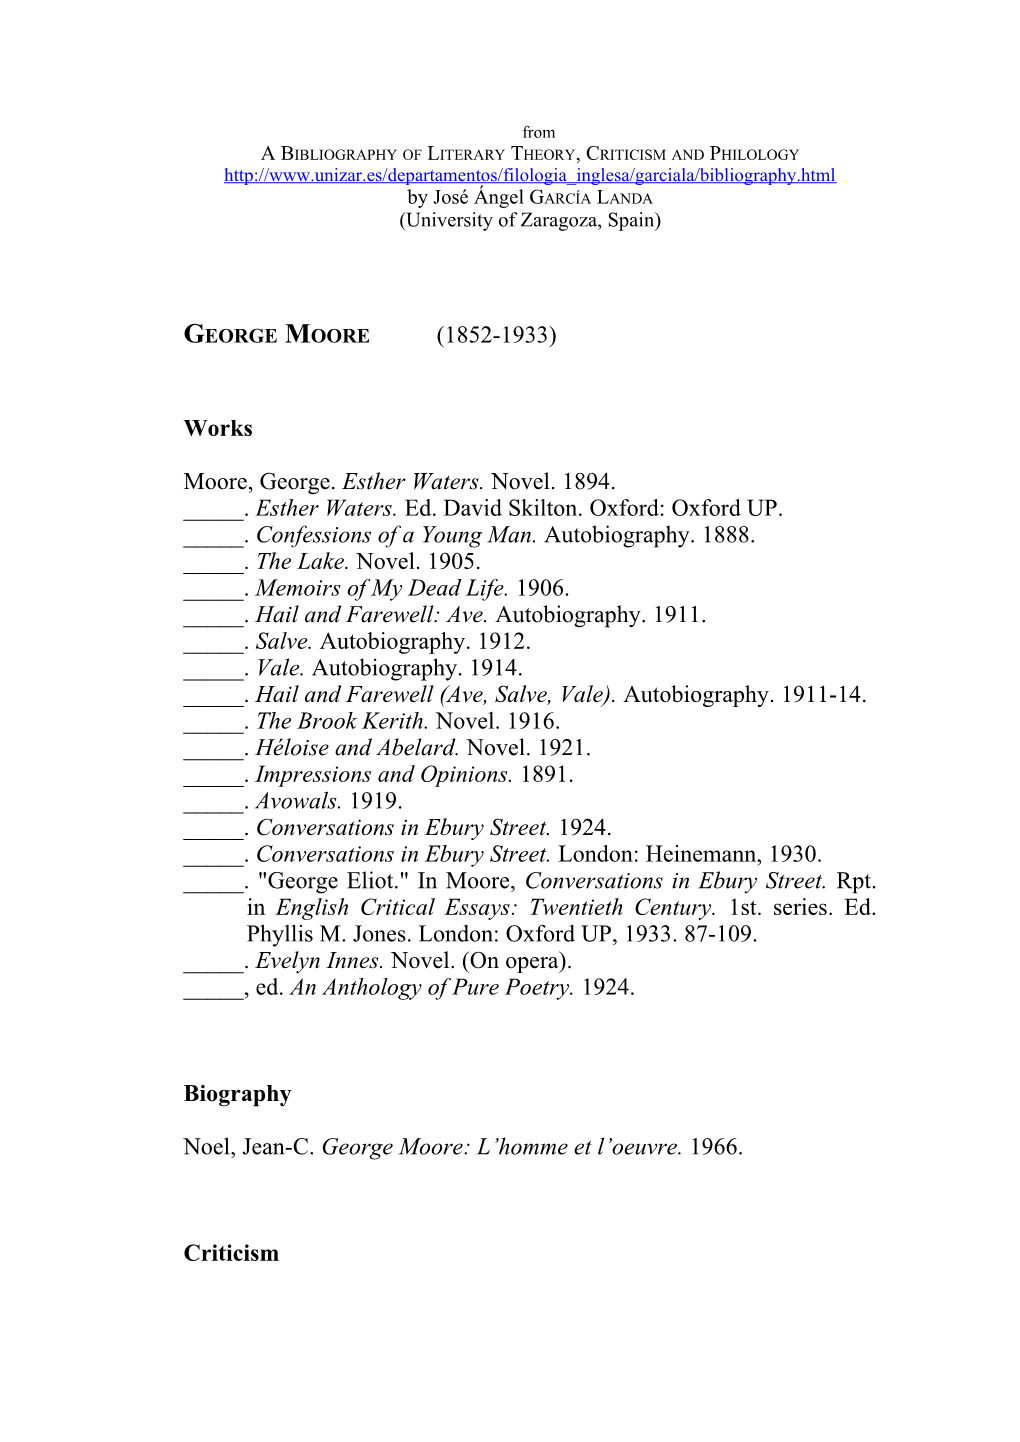 A Bibliography of Literary Theory, Criticism and Philology s22